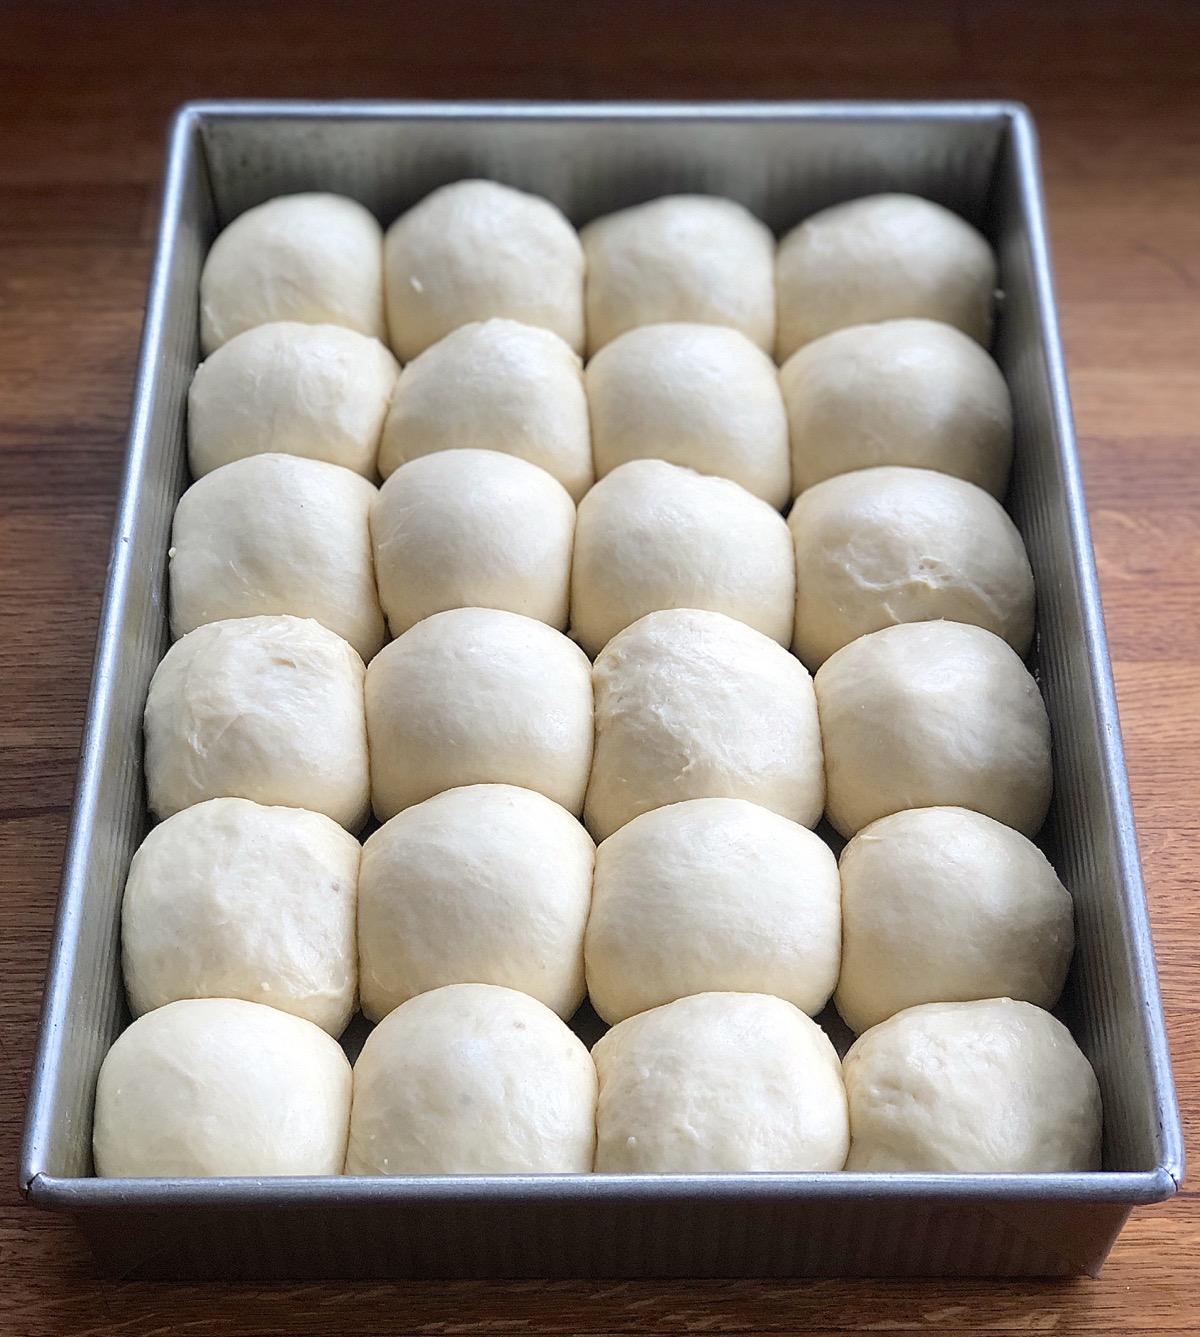 Two dozen Amish Dinner Rolls in a 9" x 13" pan, risen and ready to bake.